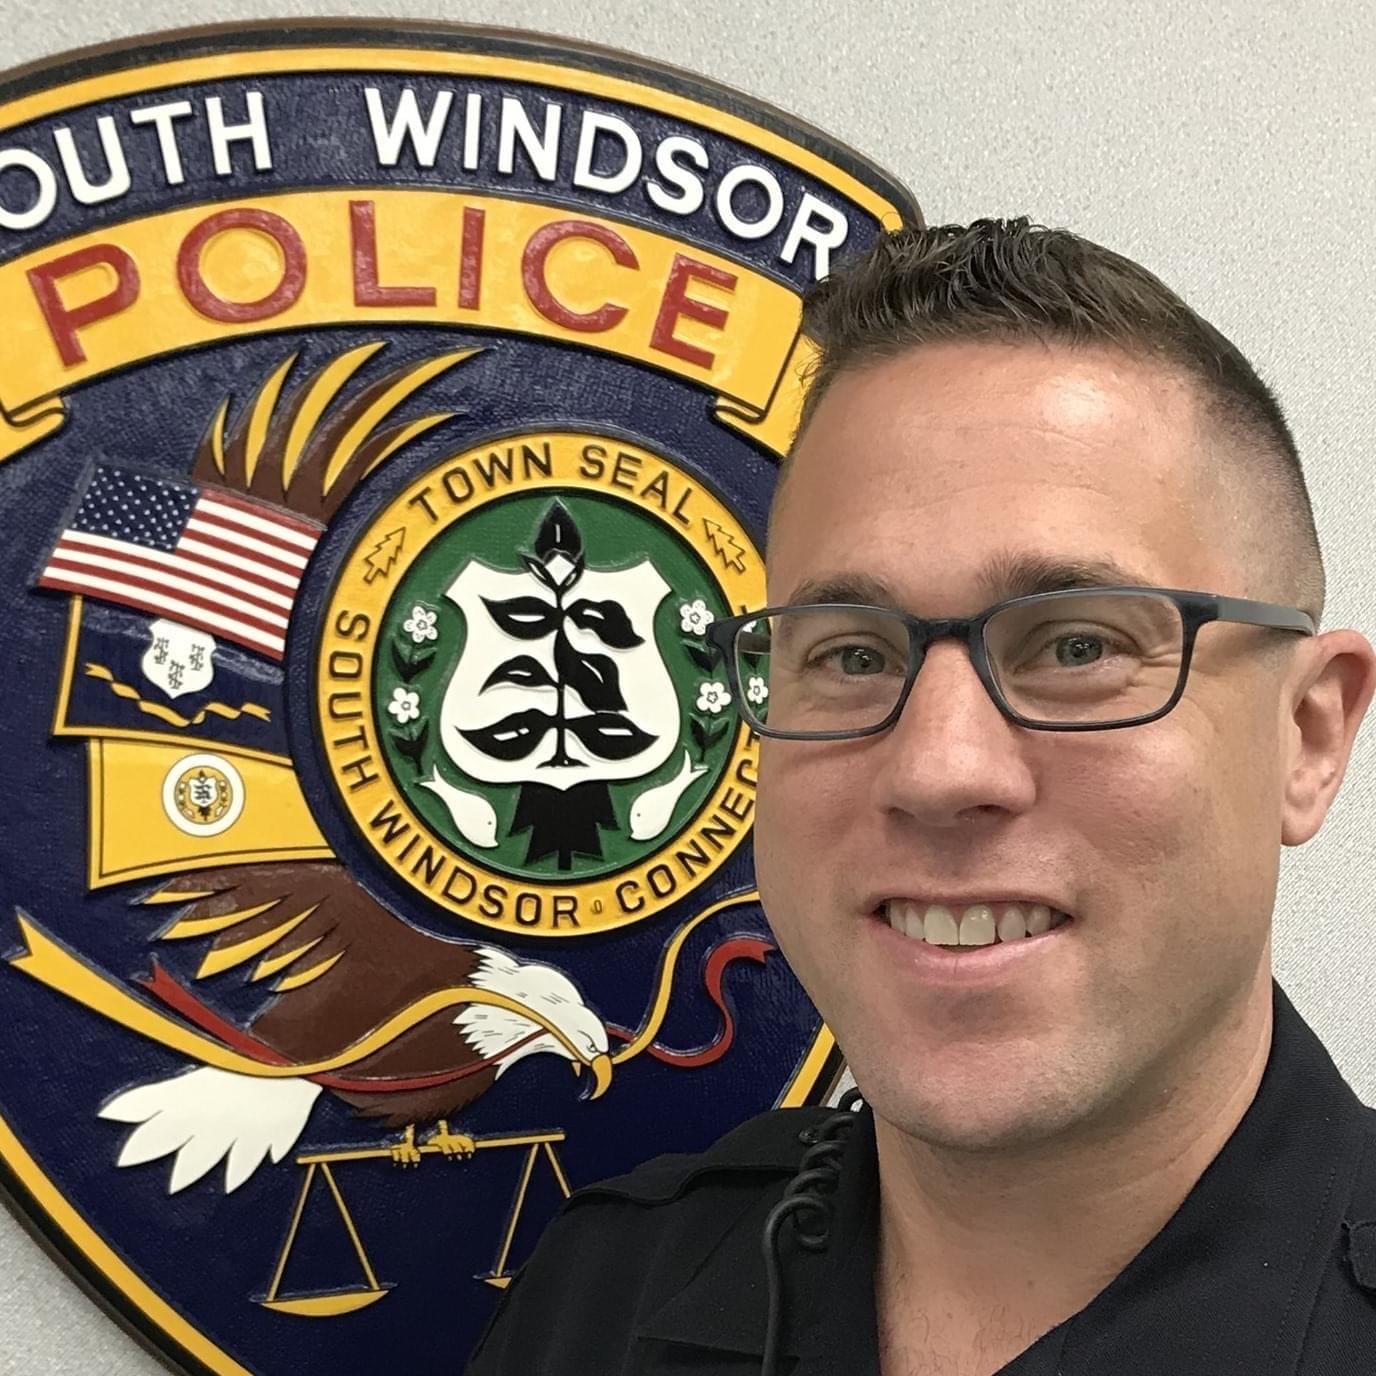 PODCAST – Wednesday, September 23: South Windsor Police Sgt. Mark Cleverdon And Will Halloween Happen This Year?